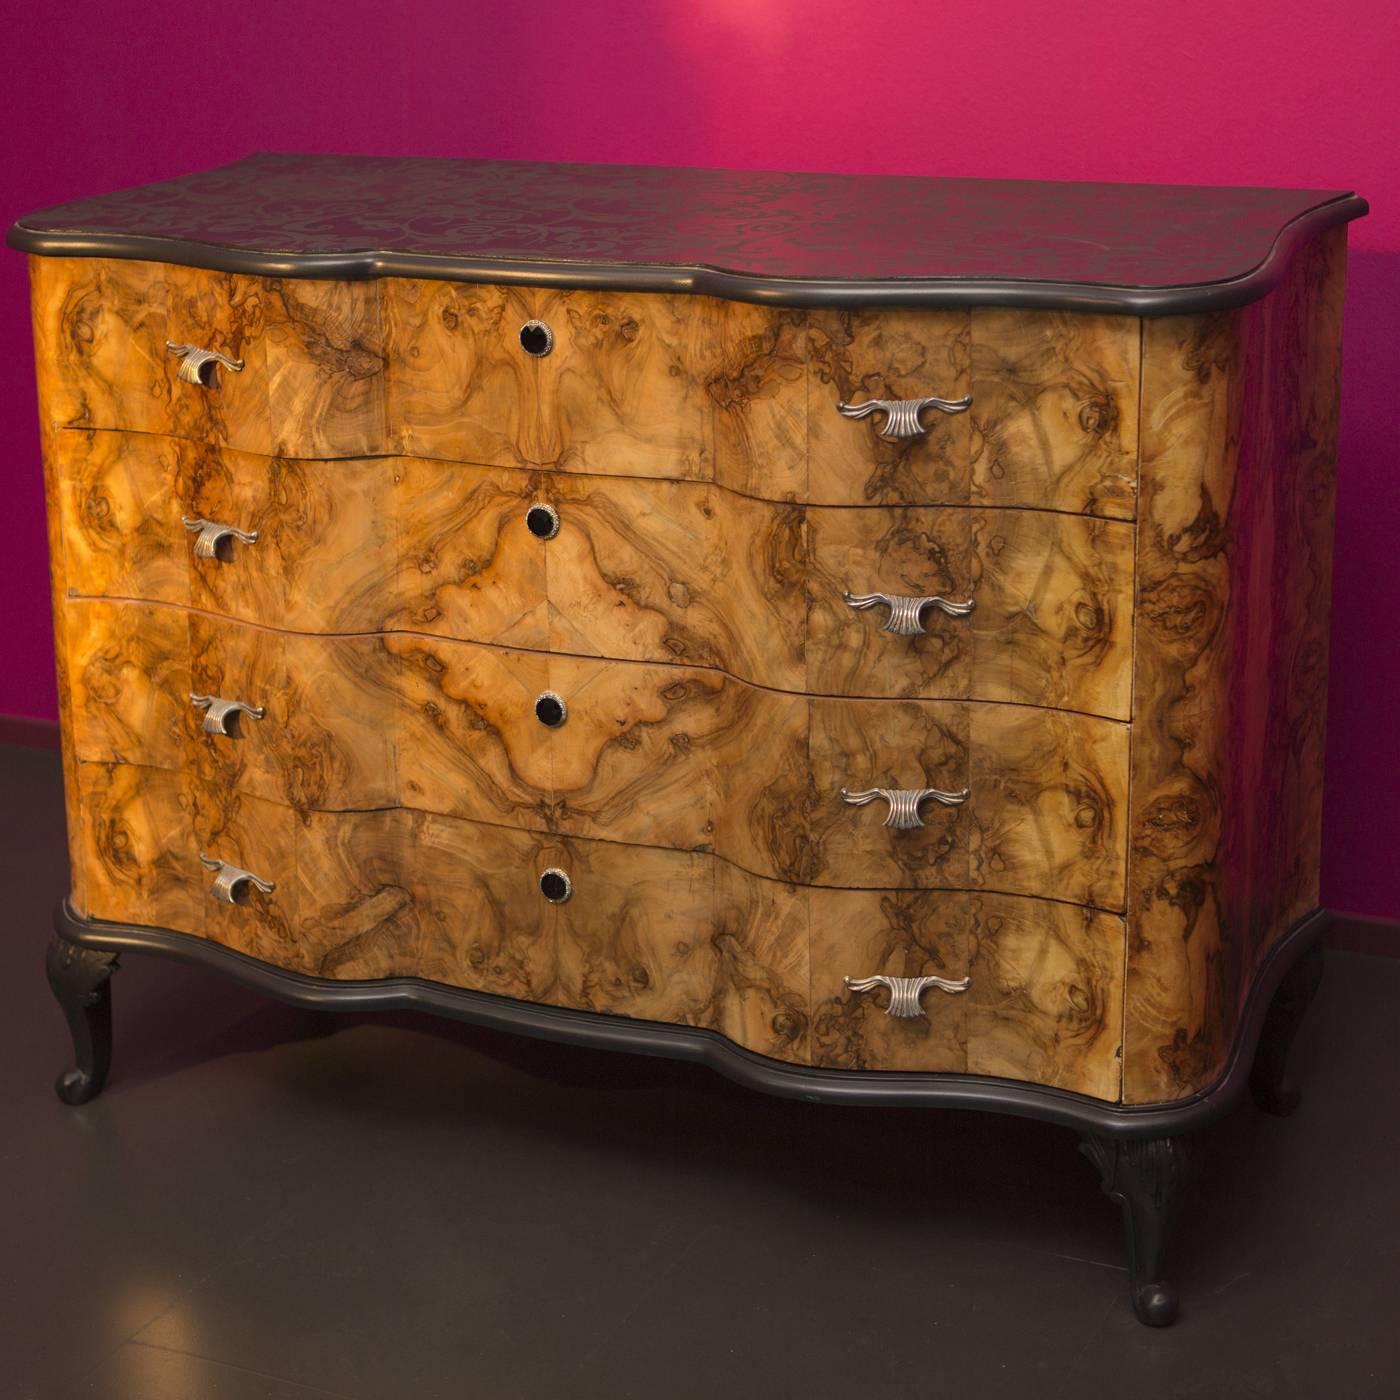 Part of the RadicaL Chic collection, this dresser is a delicate yet imposing piece that will make a statement in a classic decor, thanks to the sinuous front panels of its four drawers, which are made of walnut root and accented with jewel buttons